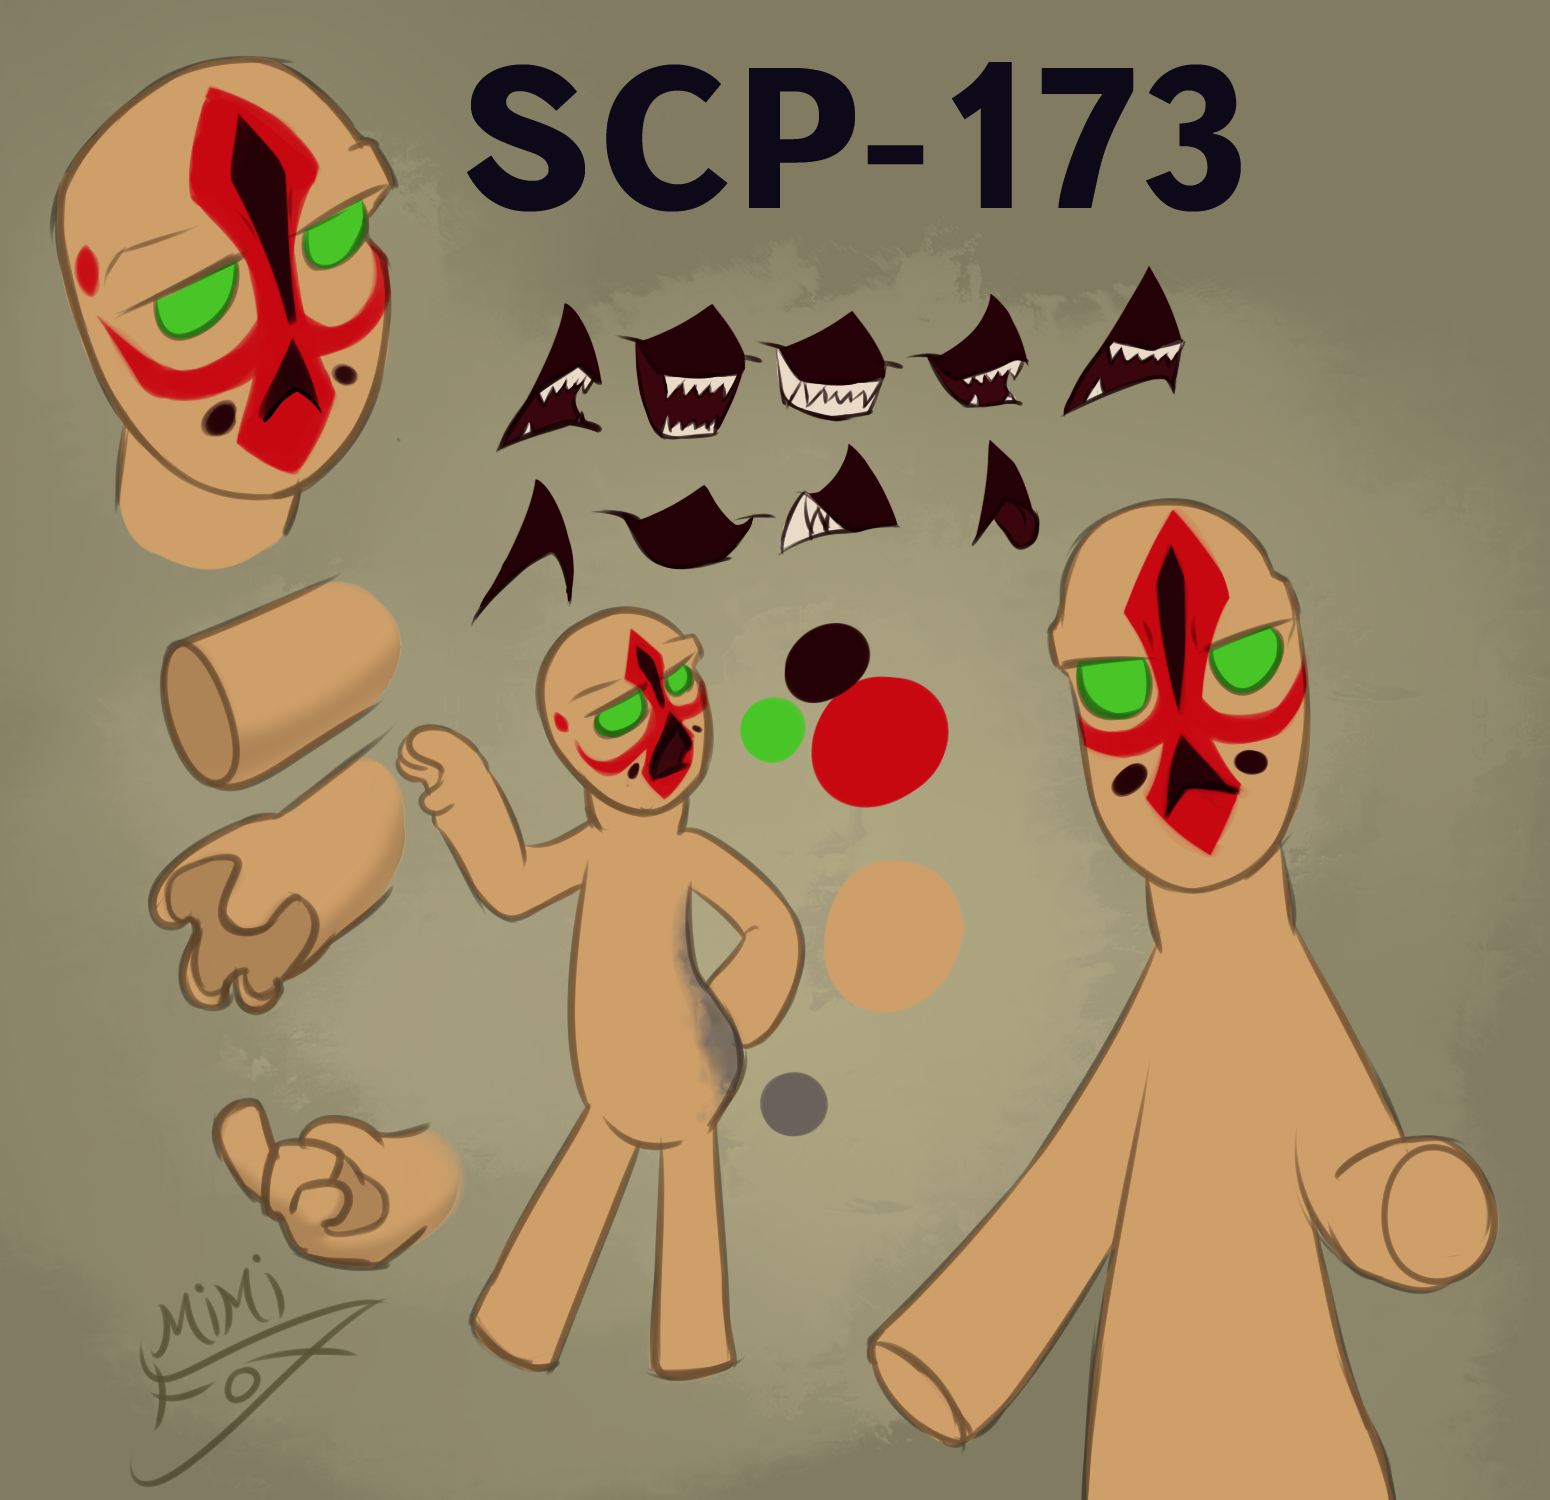 SCP's-131 and SCP-999 by Mimi-fox on DeviantArt